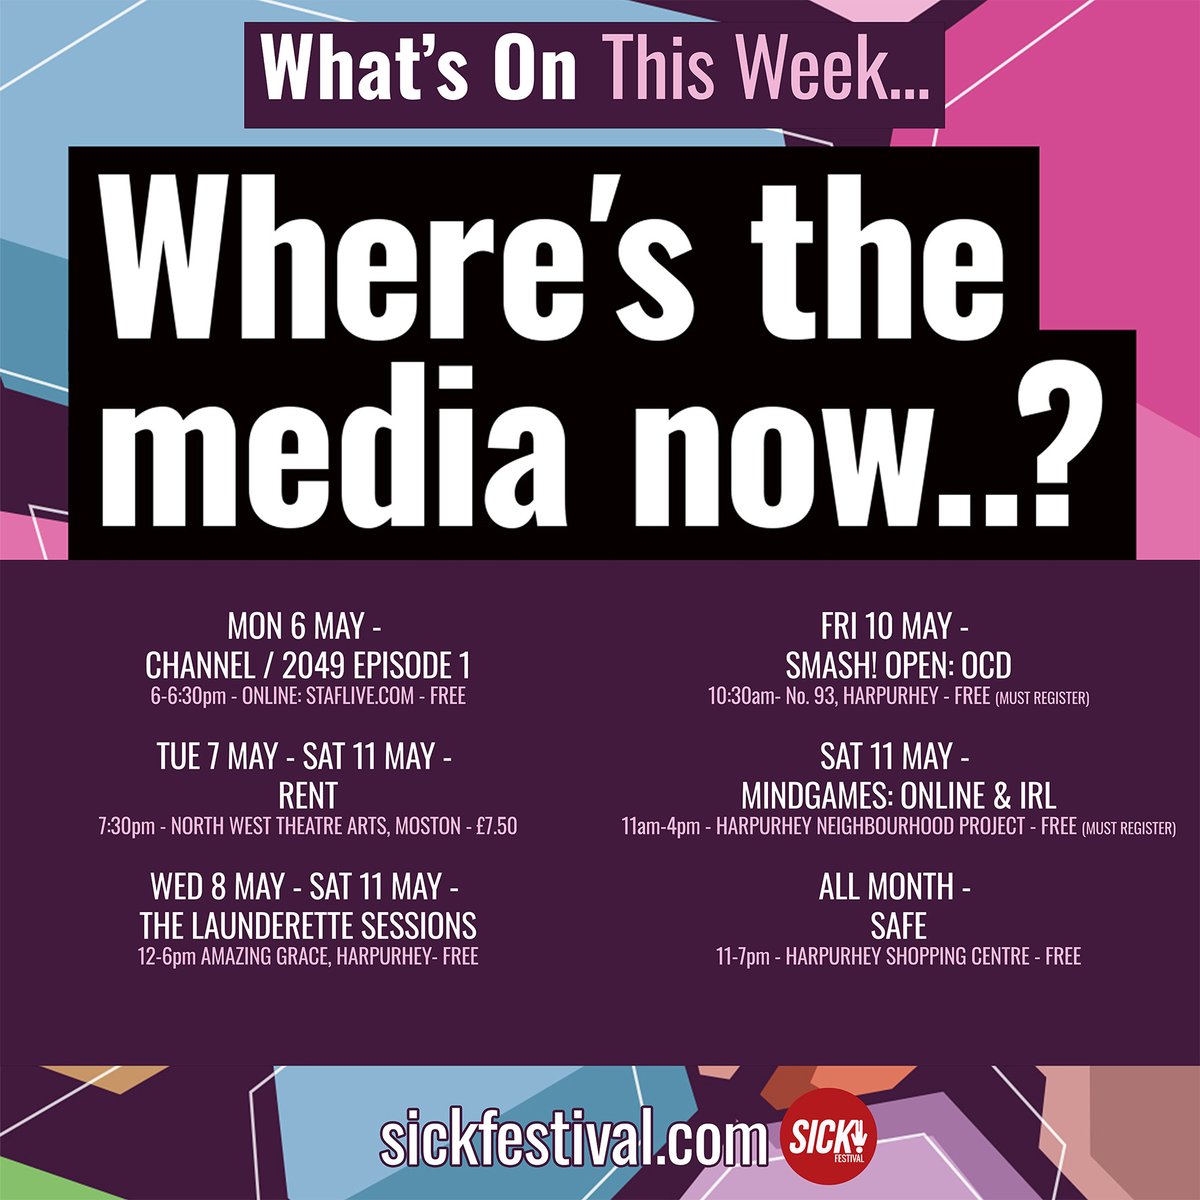 Week 2 of our ‘Where’s the media now…?’ programme, what’s on, includes the first episode of Channel / 2049 from Whitebeck Court, a take on RENT, The Launderette Sessions and OCD workshops, and Mindgames gaming day.

For info, tickets/register for events: sickfestival.com